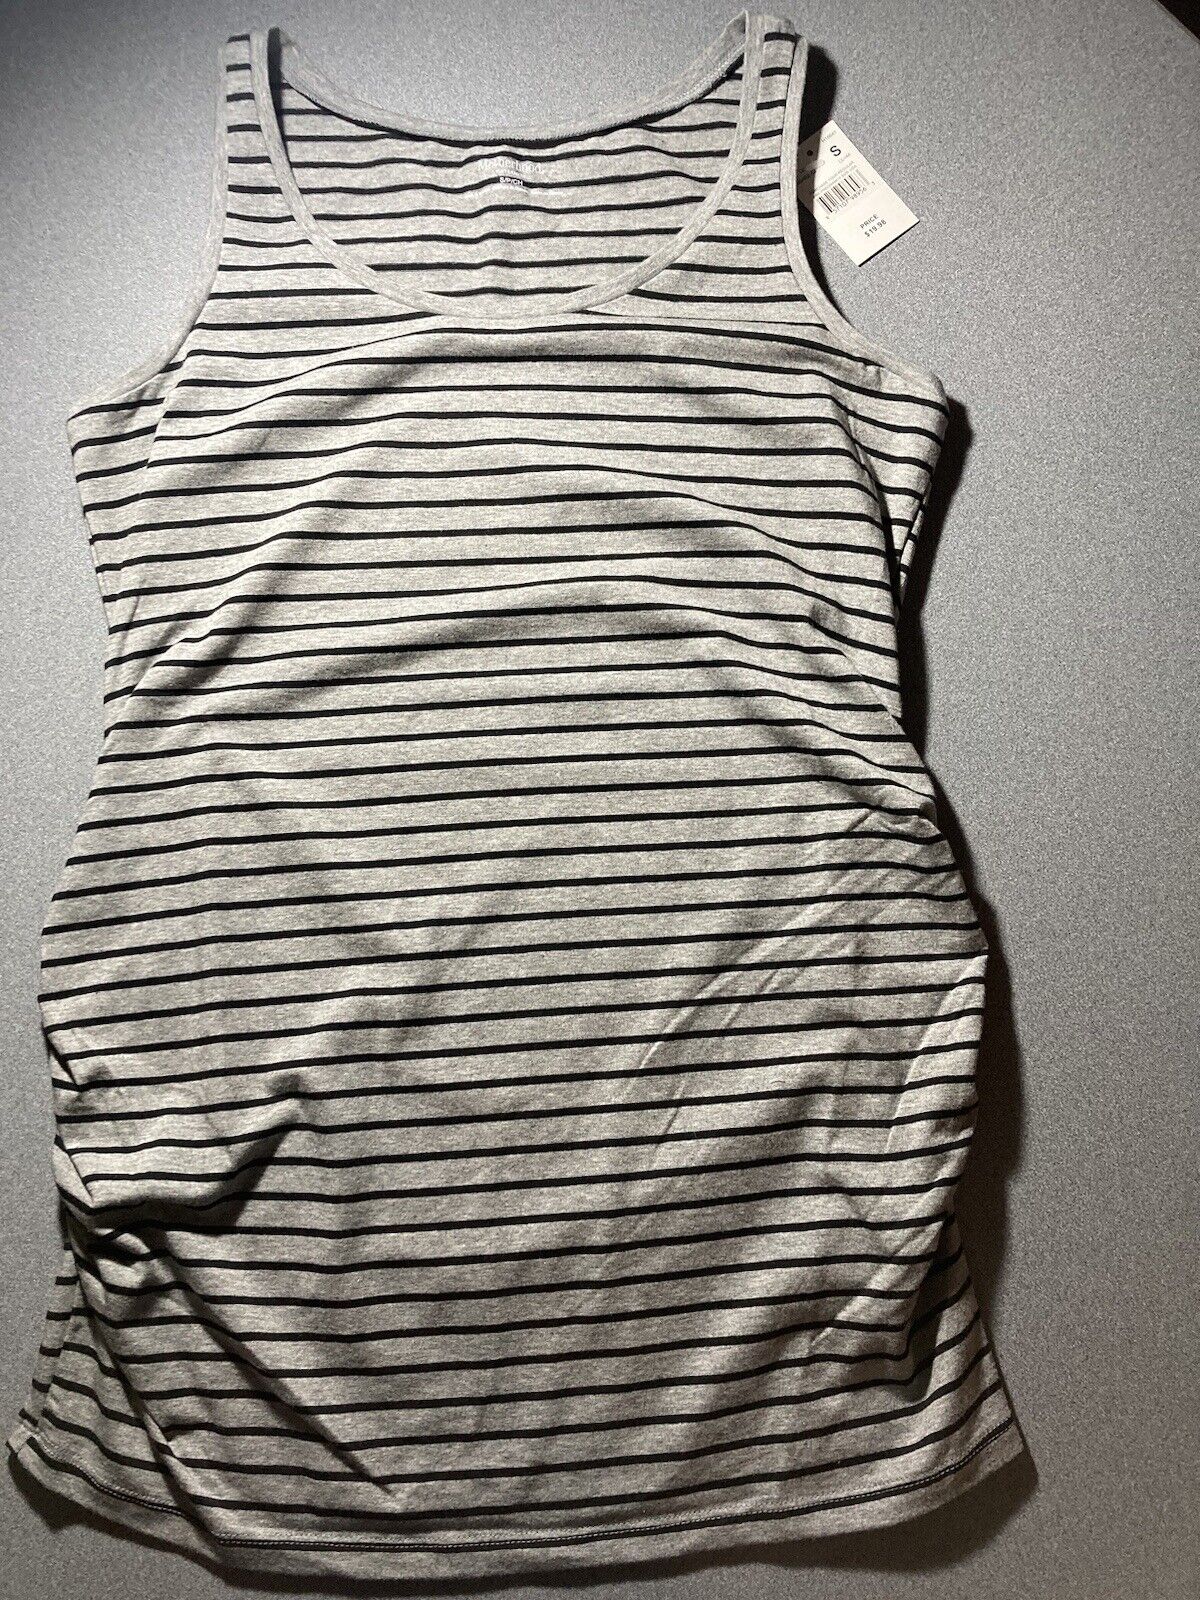 Motherhood Maternity Women’s Small gray with black striped tank top, Size Small